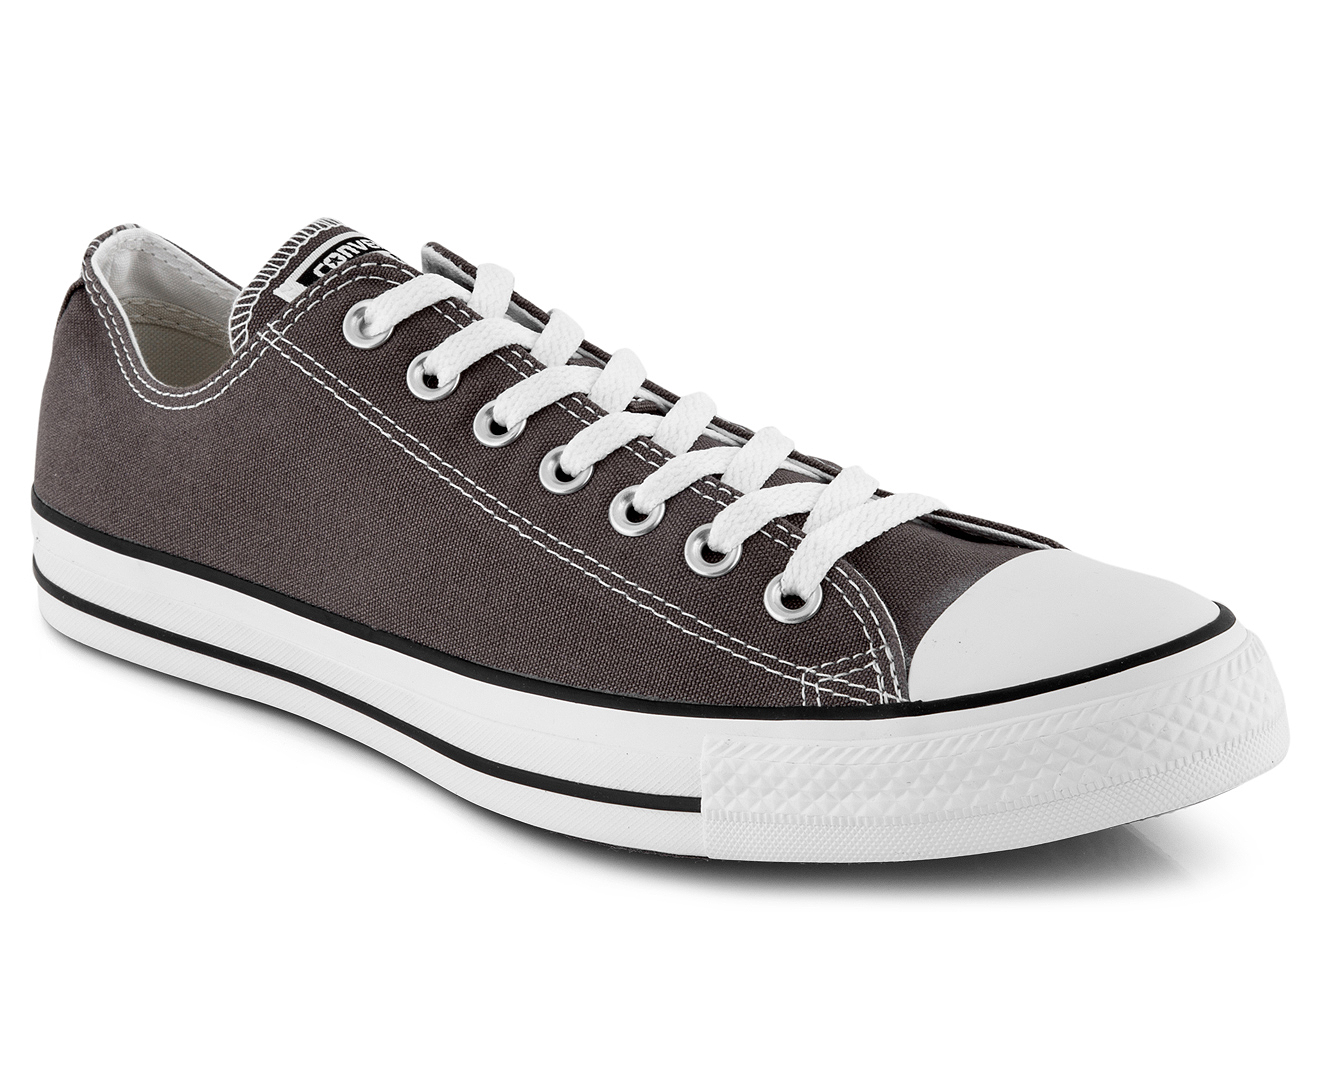 Converse Chuck Taylor Unisex All Star Low Top Shoe - Charcoal | Catch.co.nz